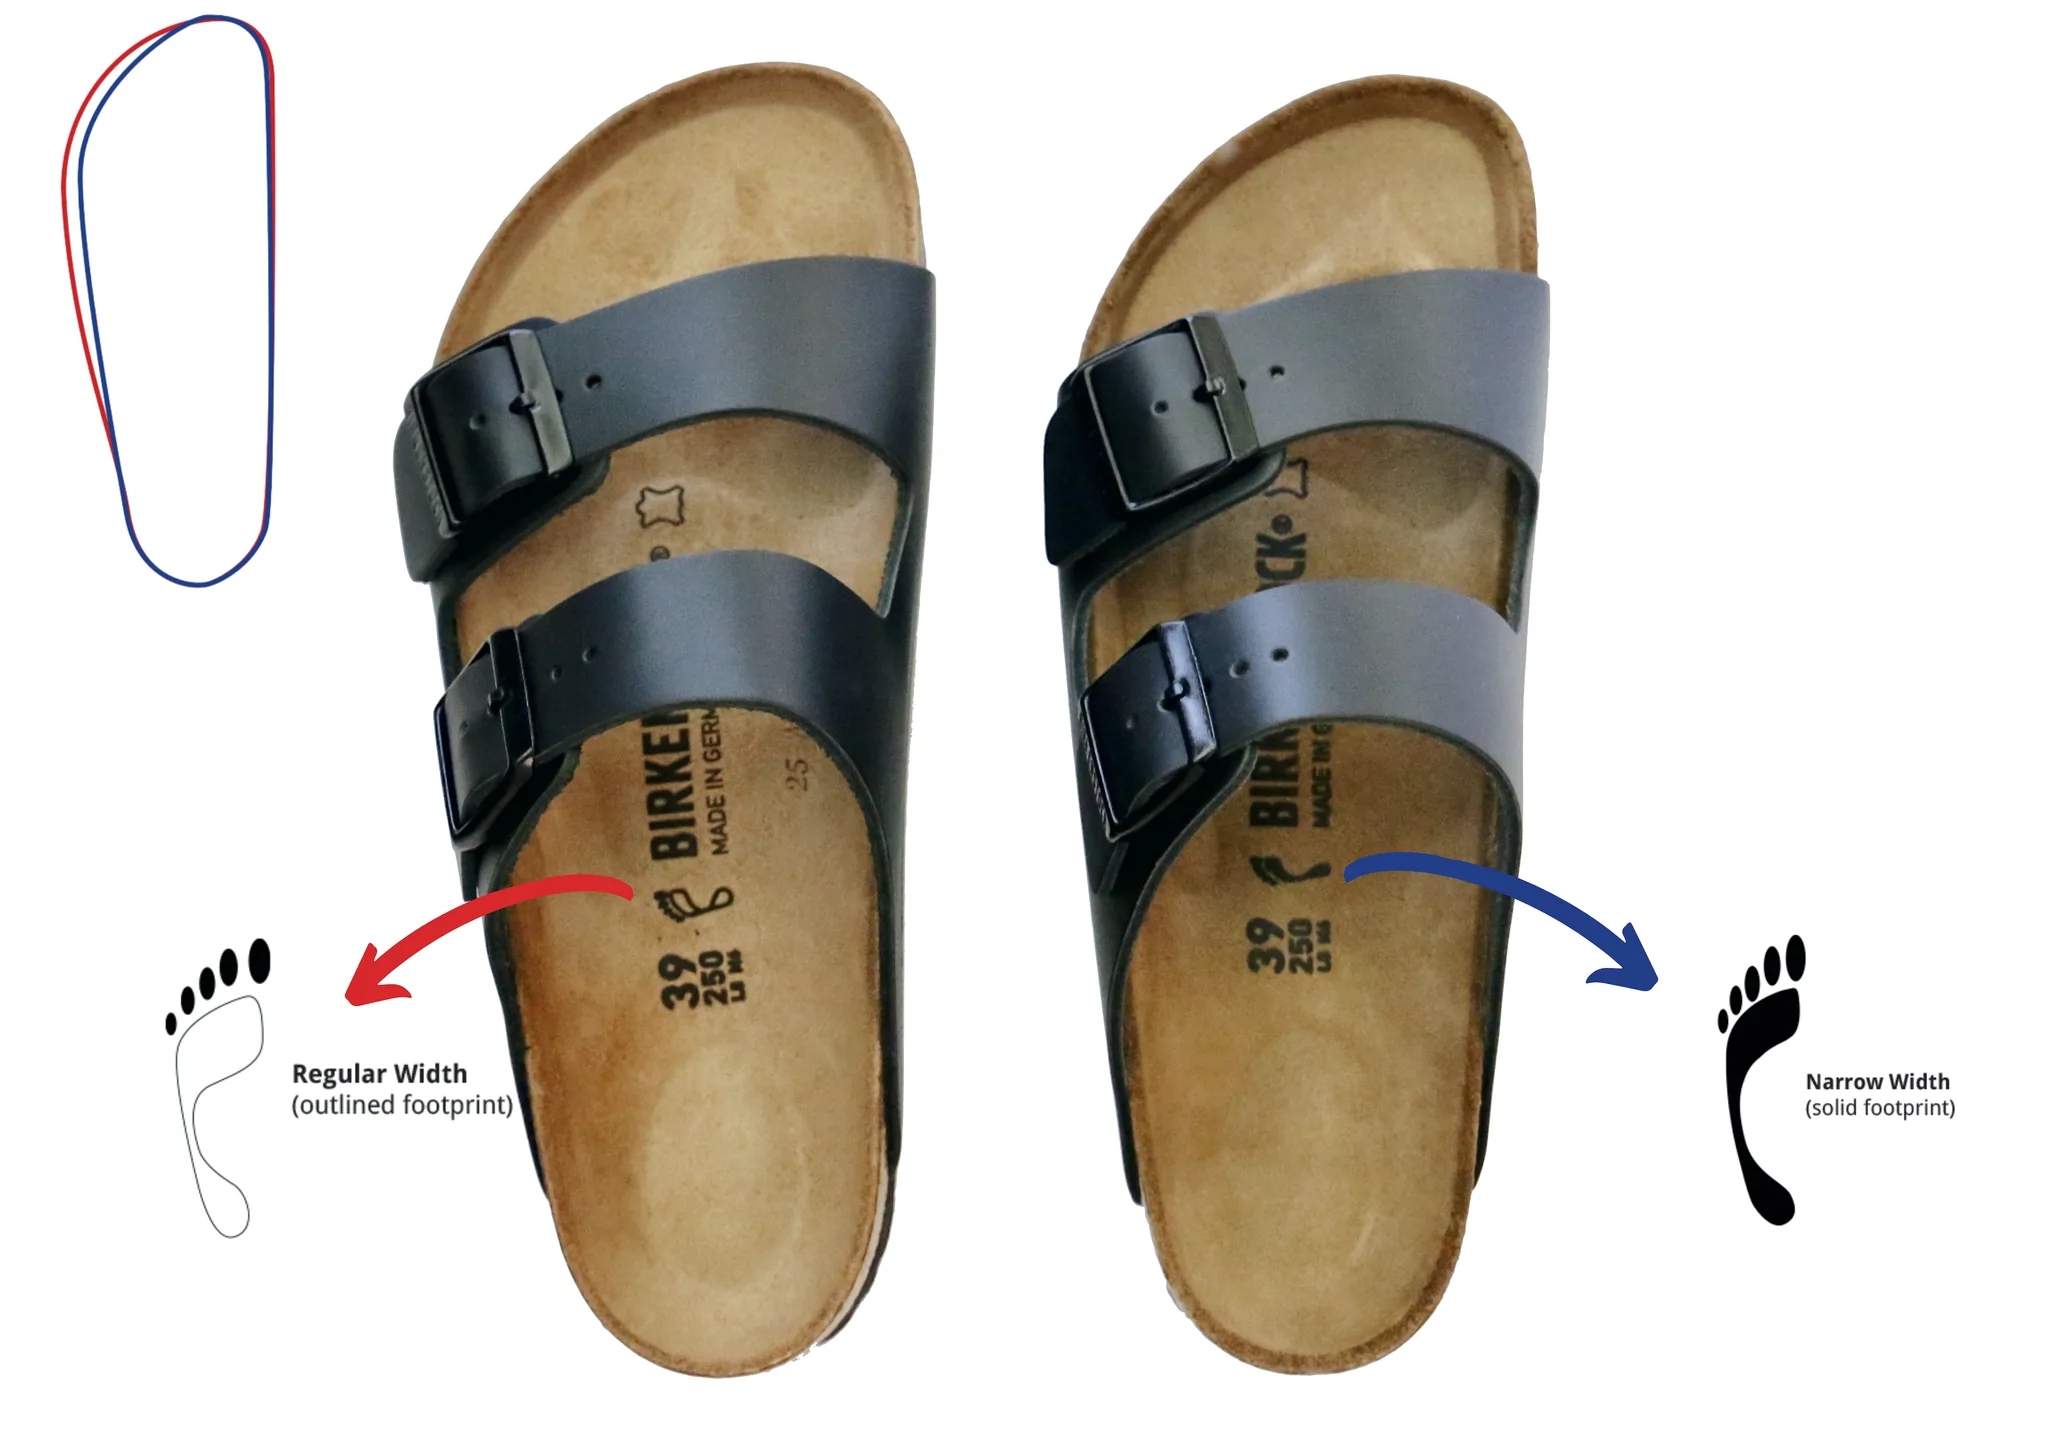 How Do I Know My Sandal Size?